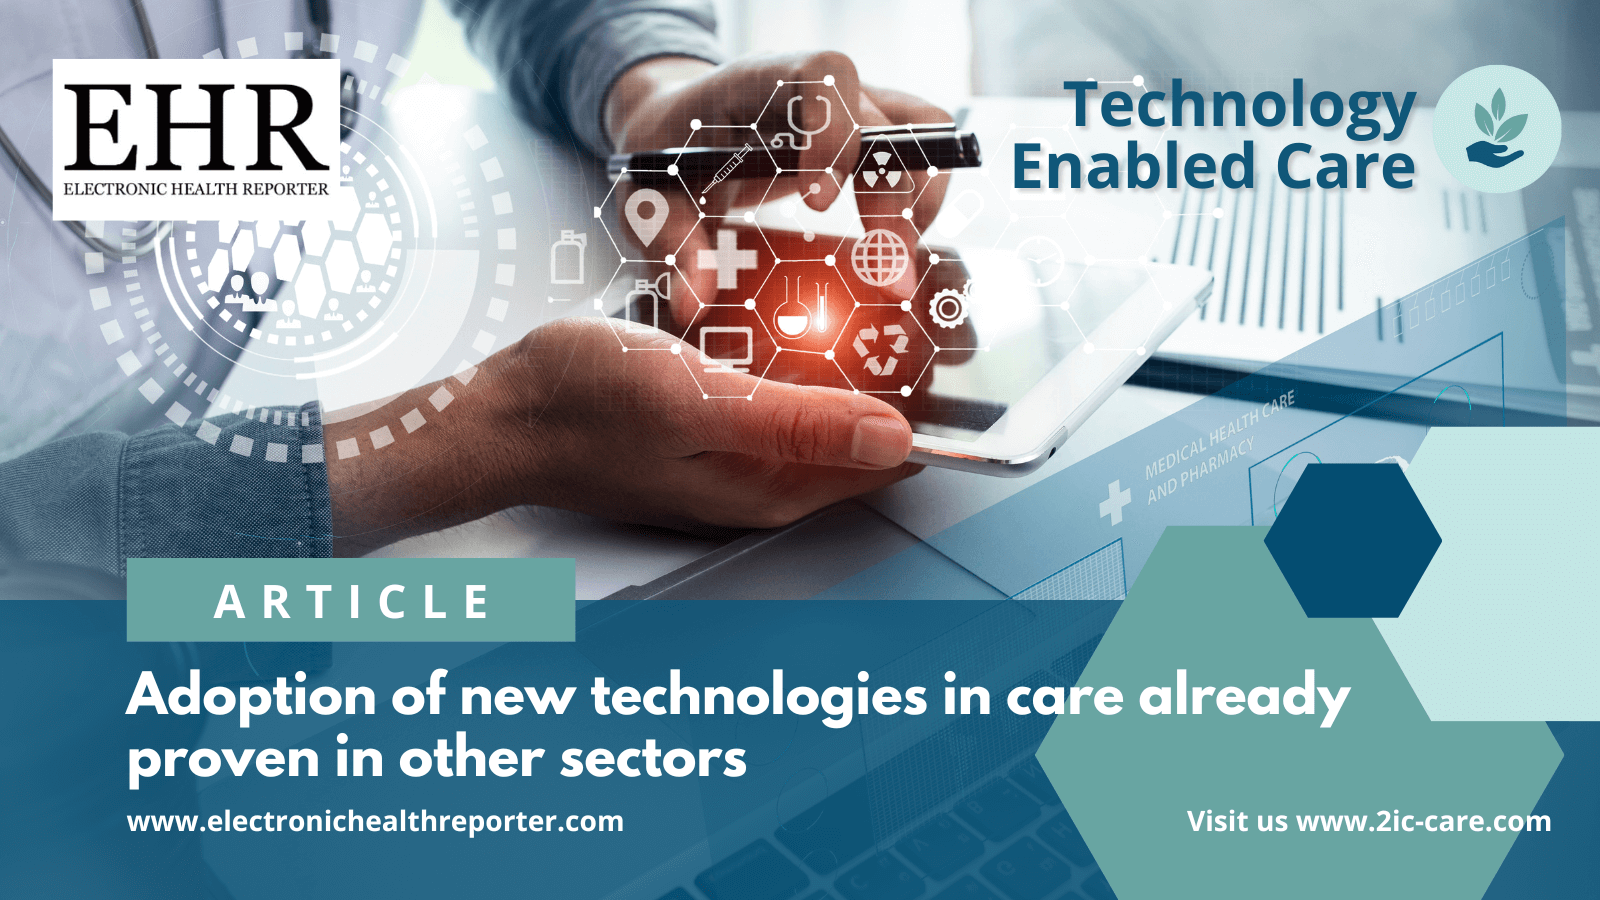 Adoption of new technologies in care already proven in other sectors